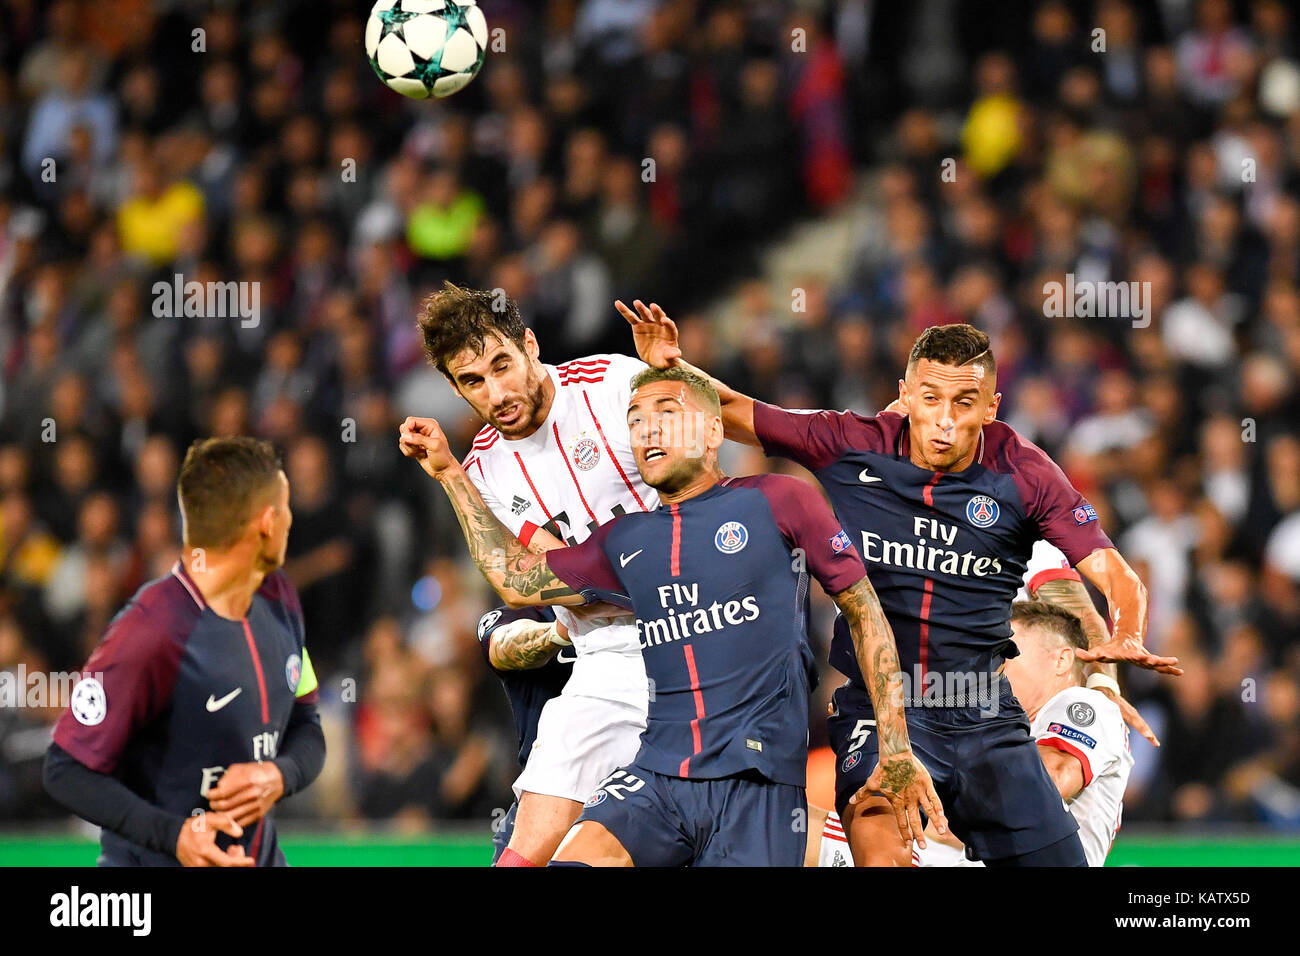 Paris. 27th Sep, 2017. Javi Martinez (2nd L) from Bayern Munich competes with Neymar (2nd R) and Marquinhos (1st R) from Paris Saint-Germain during their match of Group B of the 2017-18 season Champions League at Parc des Princes in Paris, France on Sept. 27, 2017. Paris Saint-Germain won by 3-0 at home. Credit: Chen Yichen/Xinhua/Alamy Live News Stock Photo